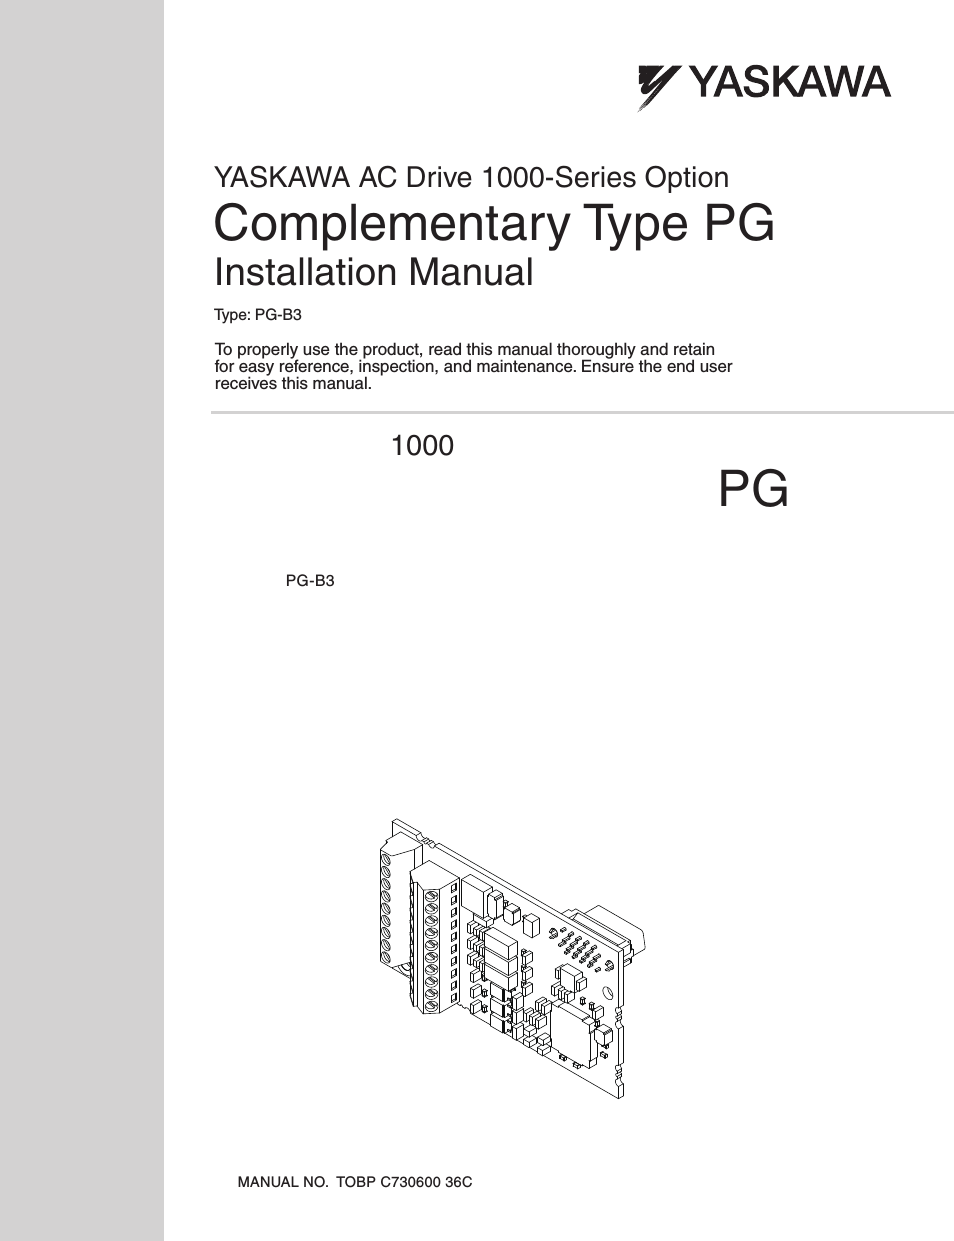 1000 Series Drive Option - Open Collector Type PG